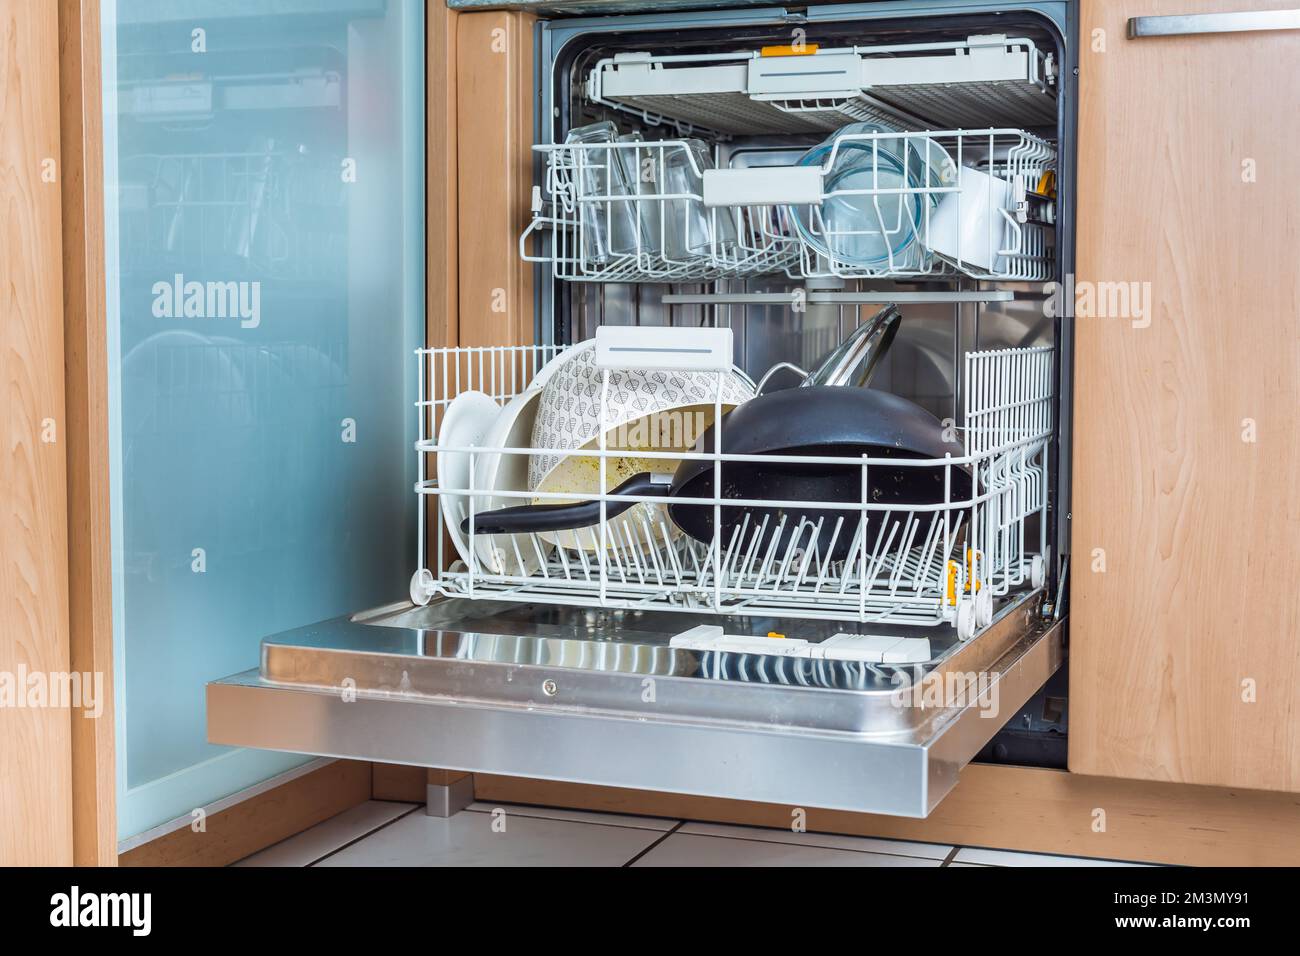 Open modern dishwasher with messy dishes  in the kitchen, built-in kitchen dish washing machine Stock Photo